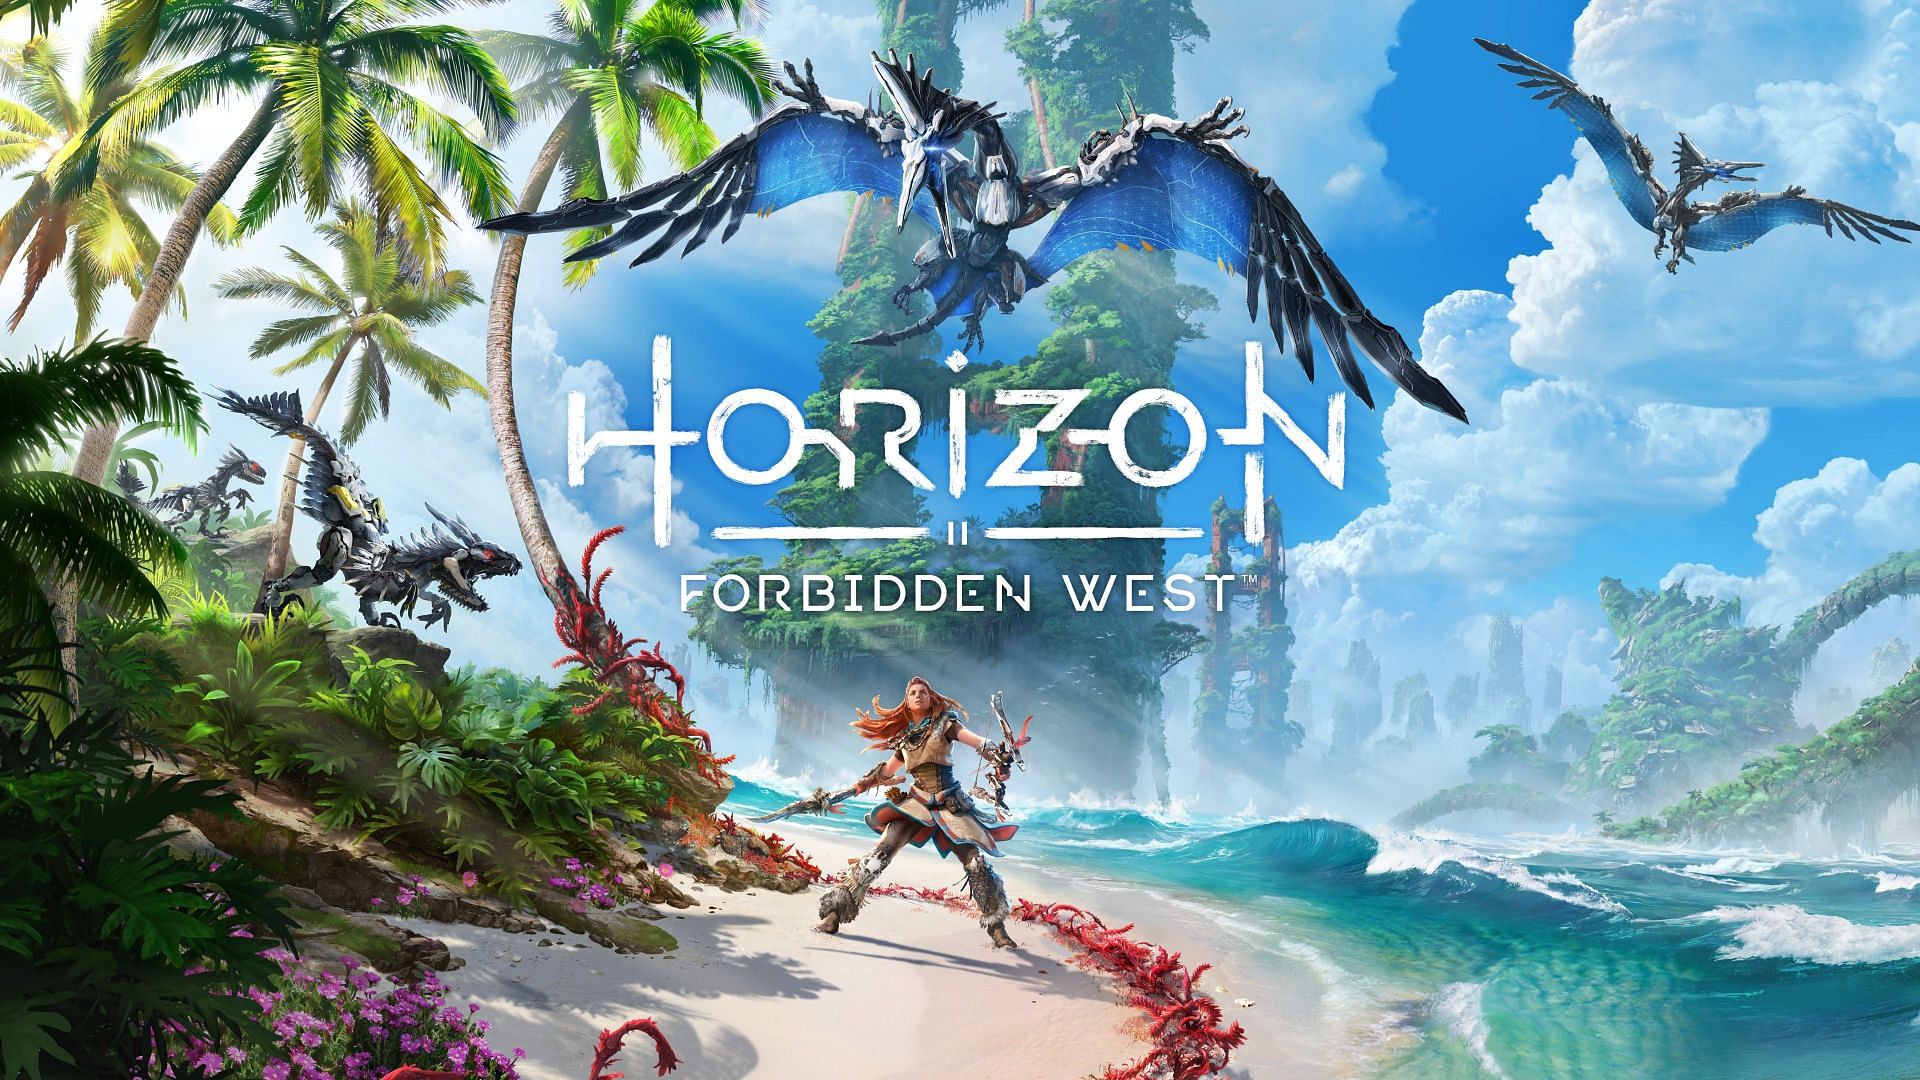 Players of both, Playstation 4 and Playstation 5, will be able to enjoy Horizon Forbidden West. (Image via Guerilla Games)